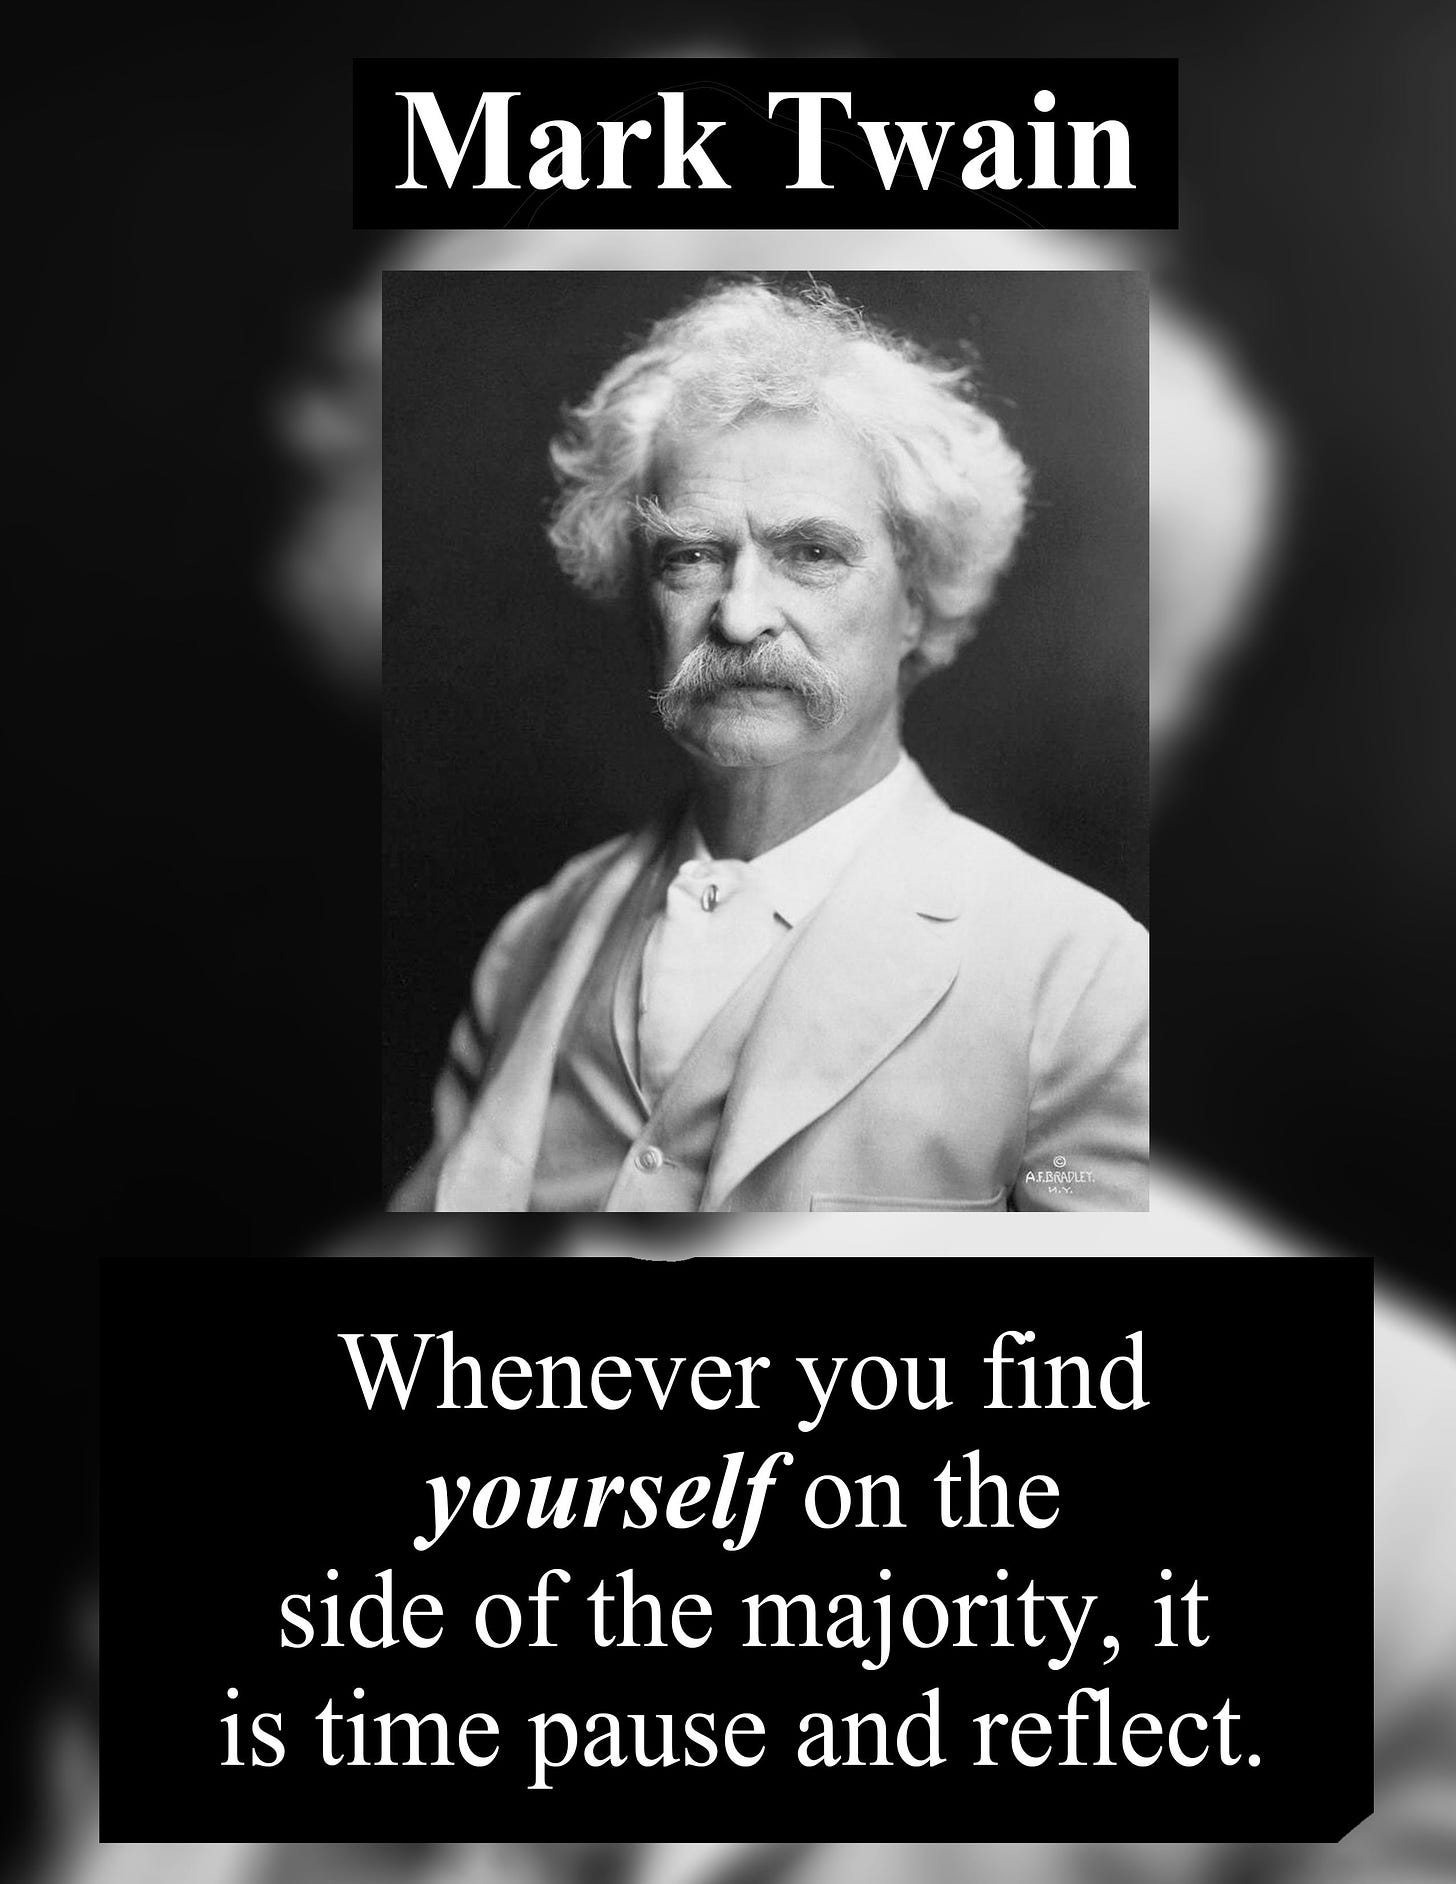 Mark Twain Quotes. Happiness, Friends, Life, & Books. Mark Twain Funny  Inspirational Short Quotes | Mark twain quotes, Mark twain books, Mark  twain quotes life